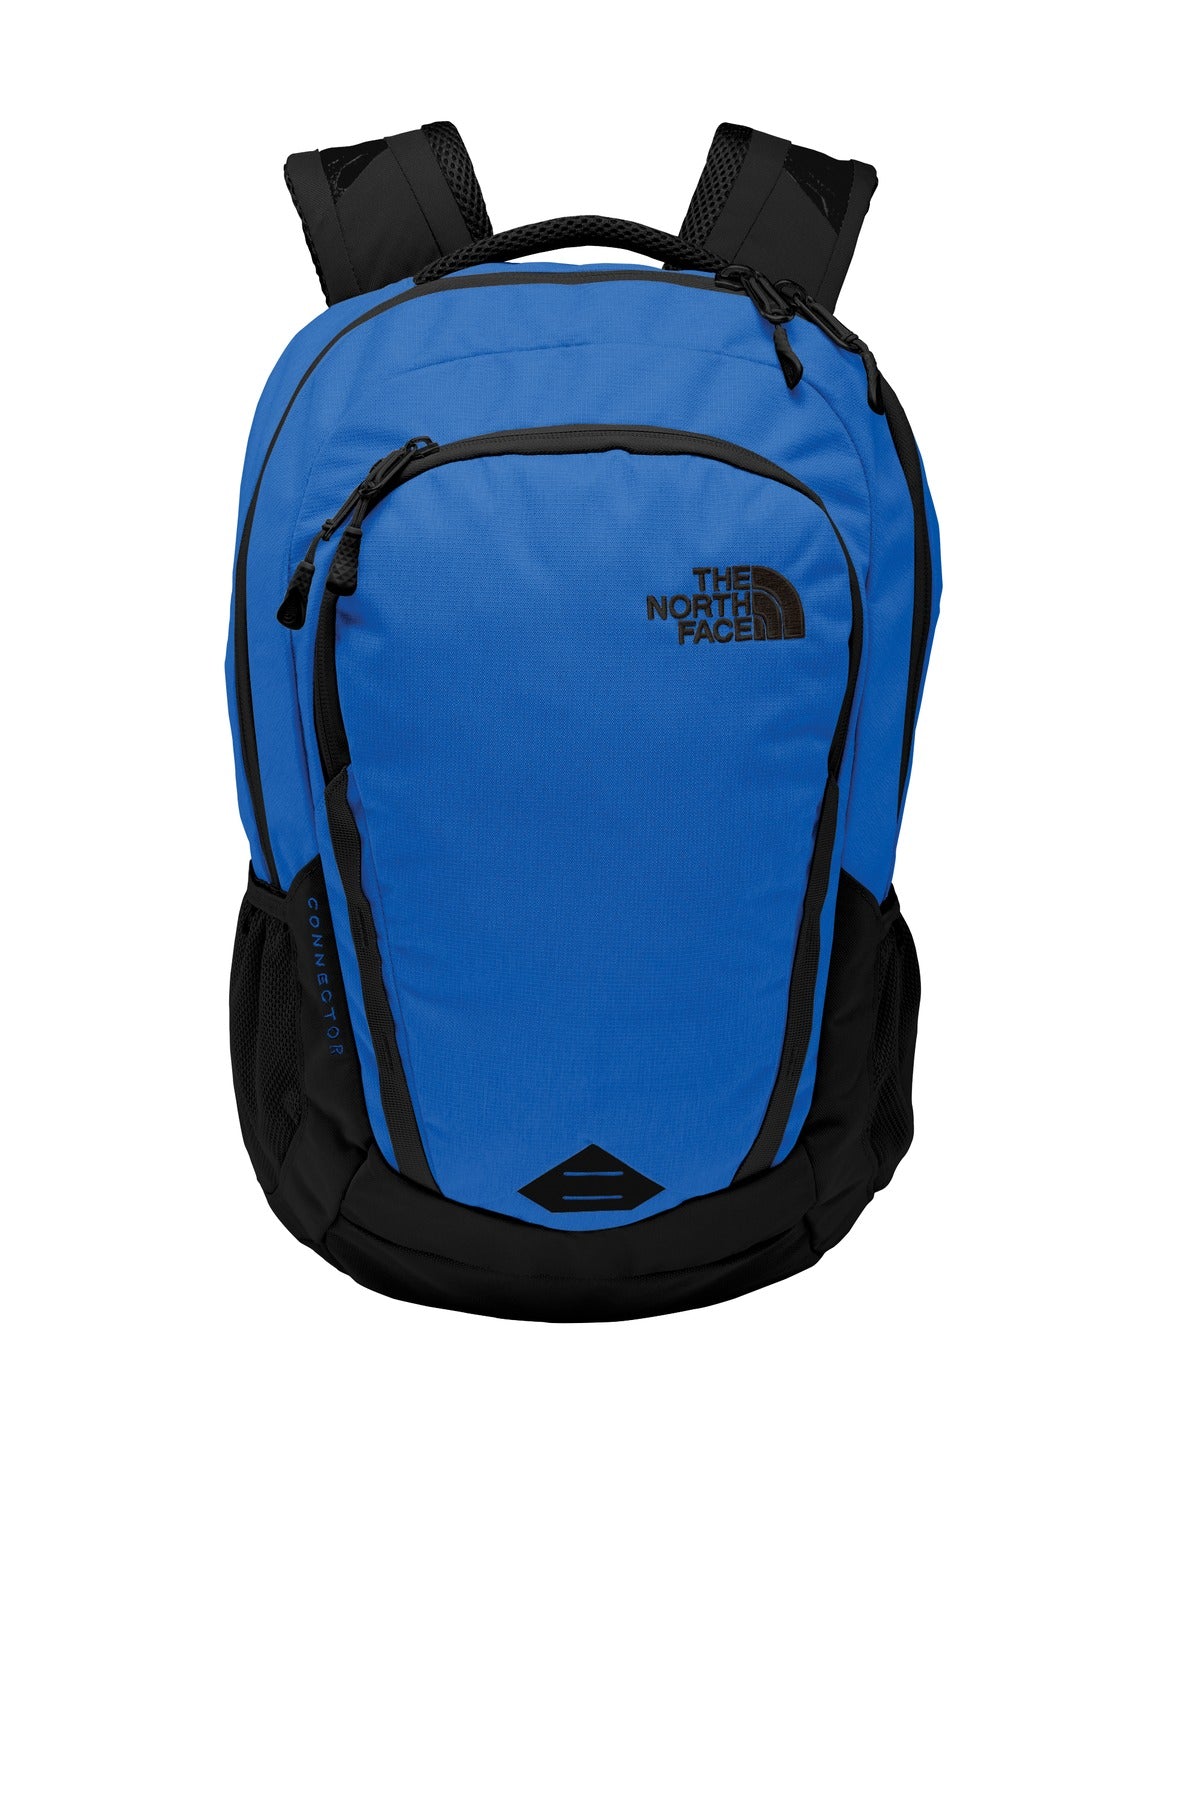 Bags Monster Blue/ TNF Black OSFA The North Face